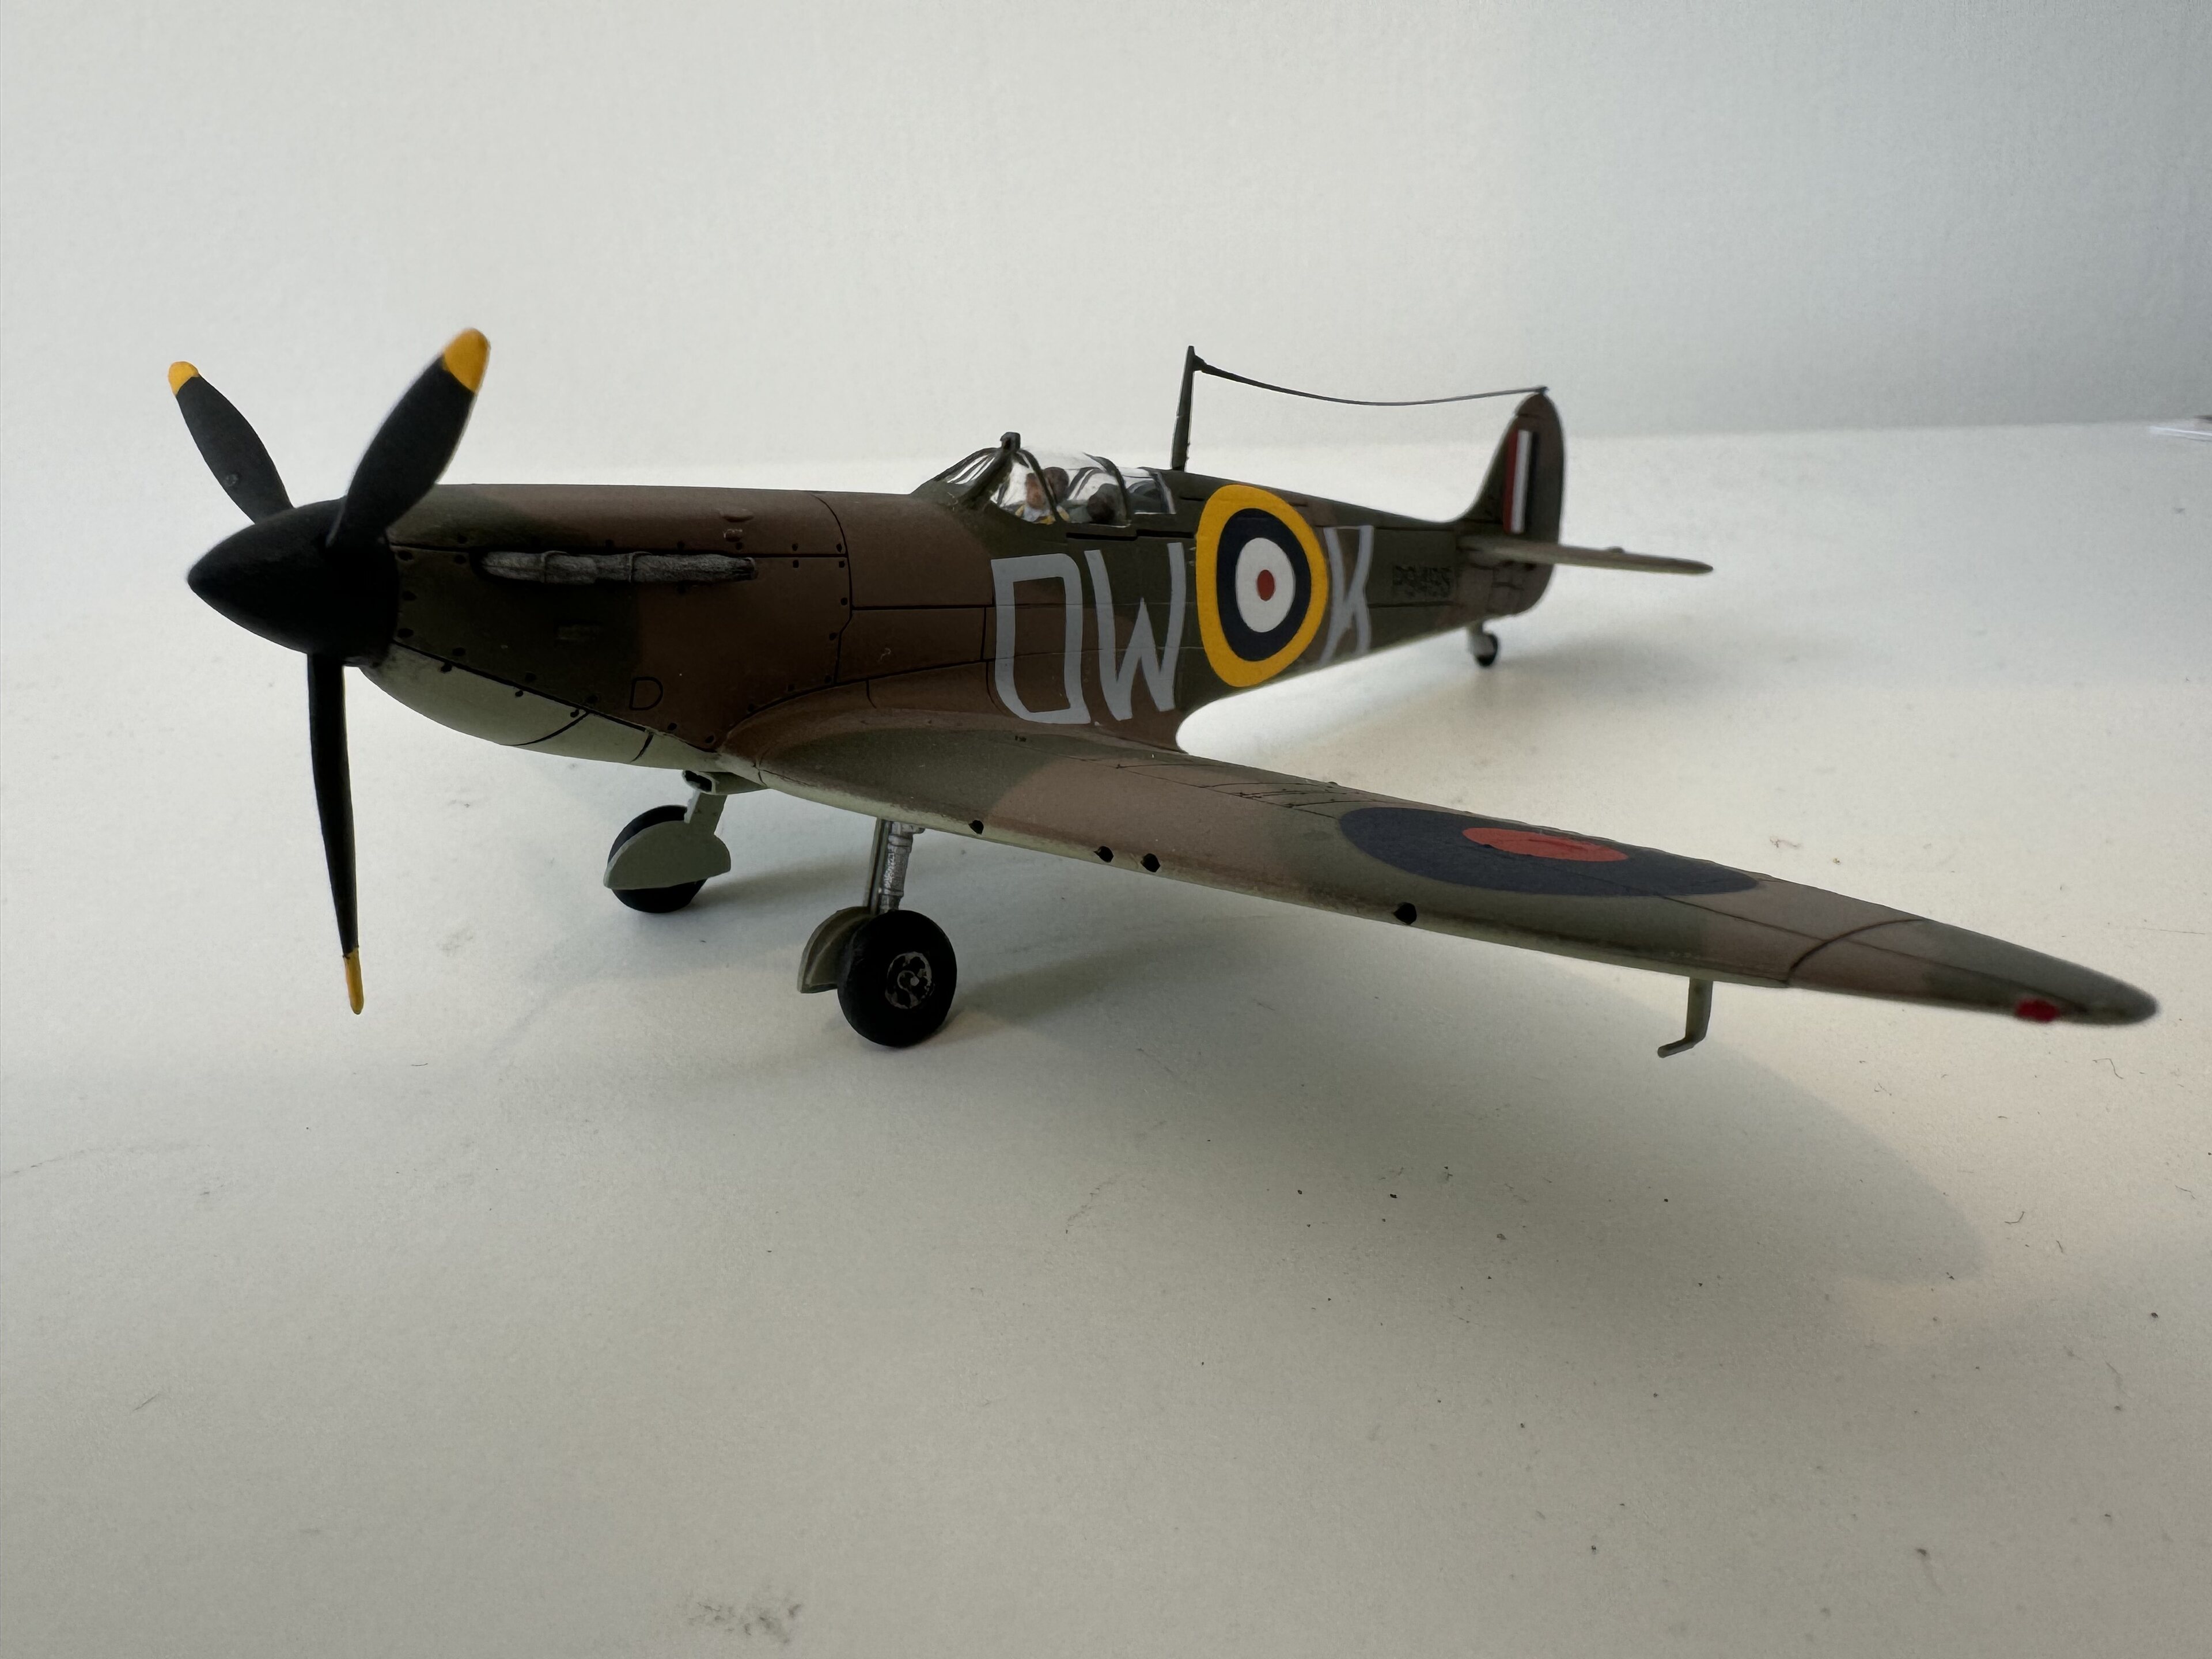 Pistonheads - The image showcases a small-scale model of an airplane, specifically a World War II fighter plane. The airplane is predominantly brown and black in color, with yellow markings on the wings. It's displayed on a tabletop with wheels still attached to the bottom. The background is neutral, providing a clear view of the model aircraft. The model appears to be well-crafted, capturing the details of the historical plane, making it a valuable piece for collectors interested in aviation history.